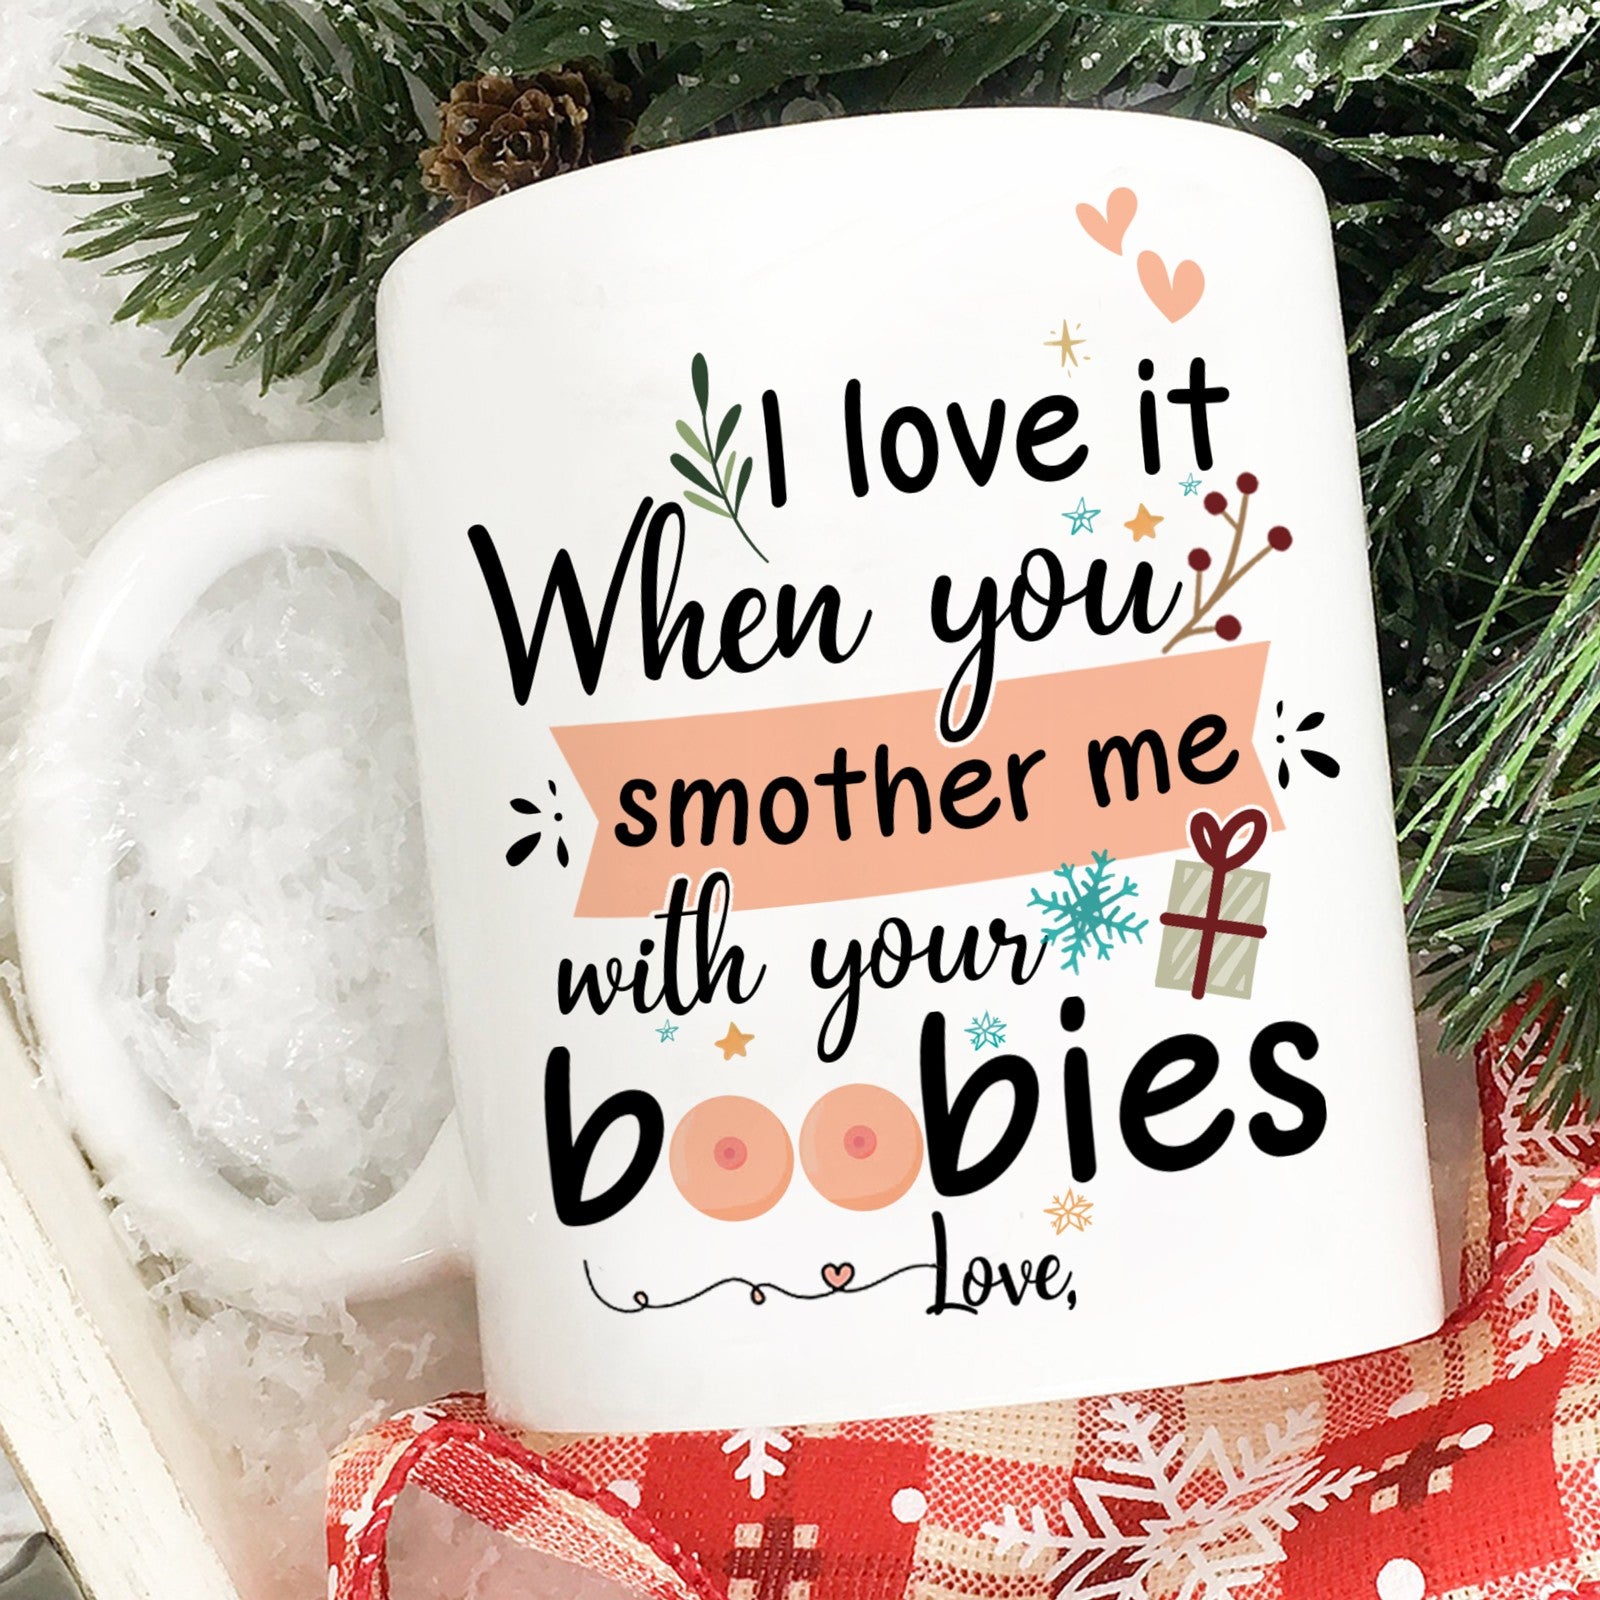 59816-Personalized Funny Gift for Wife, I Love It When You Smother Me Mug H0